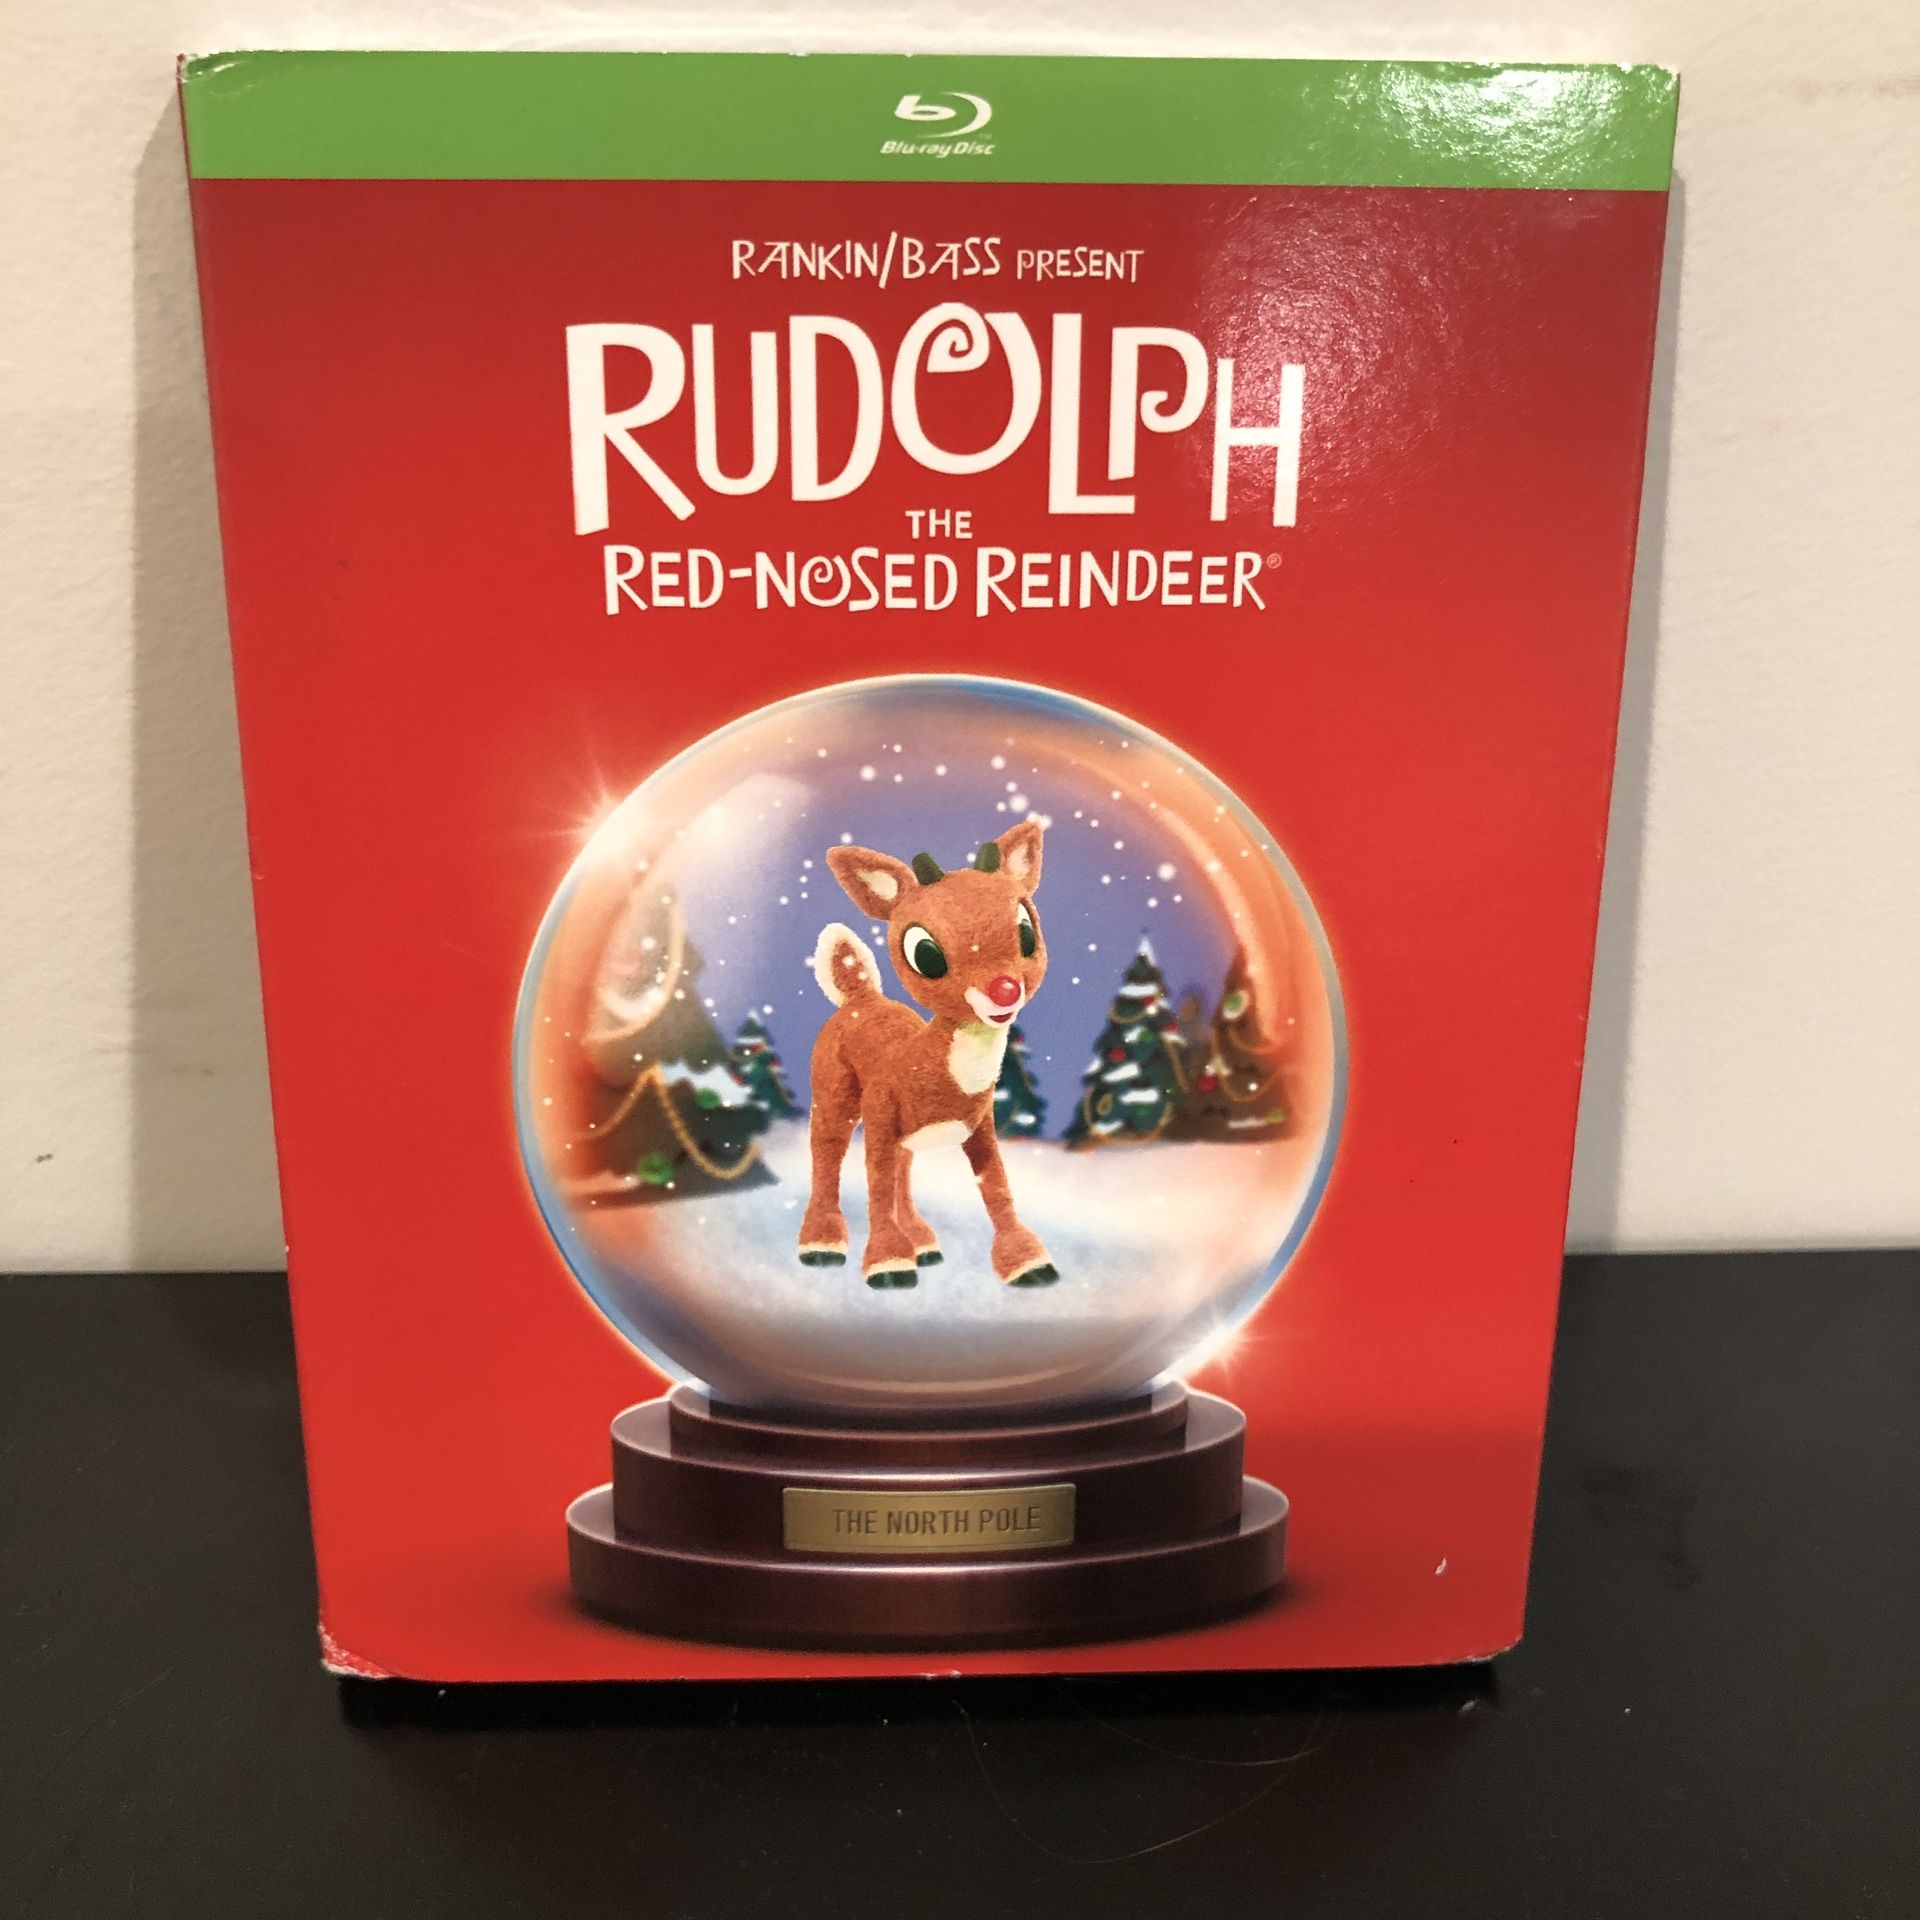 Rudolph the Red-Nosed Reindeer (Deluxe Edition) movie blu-ray Brand New